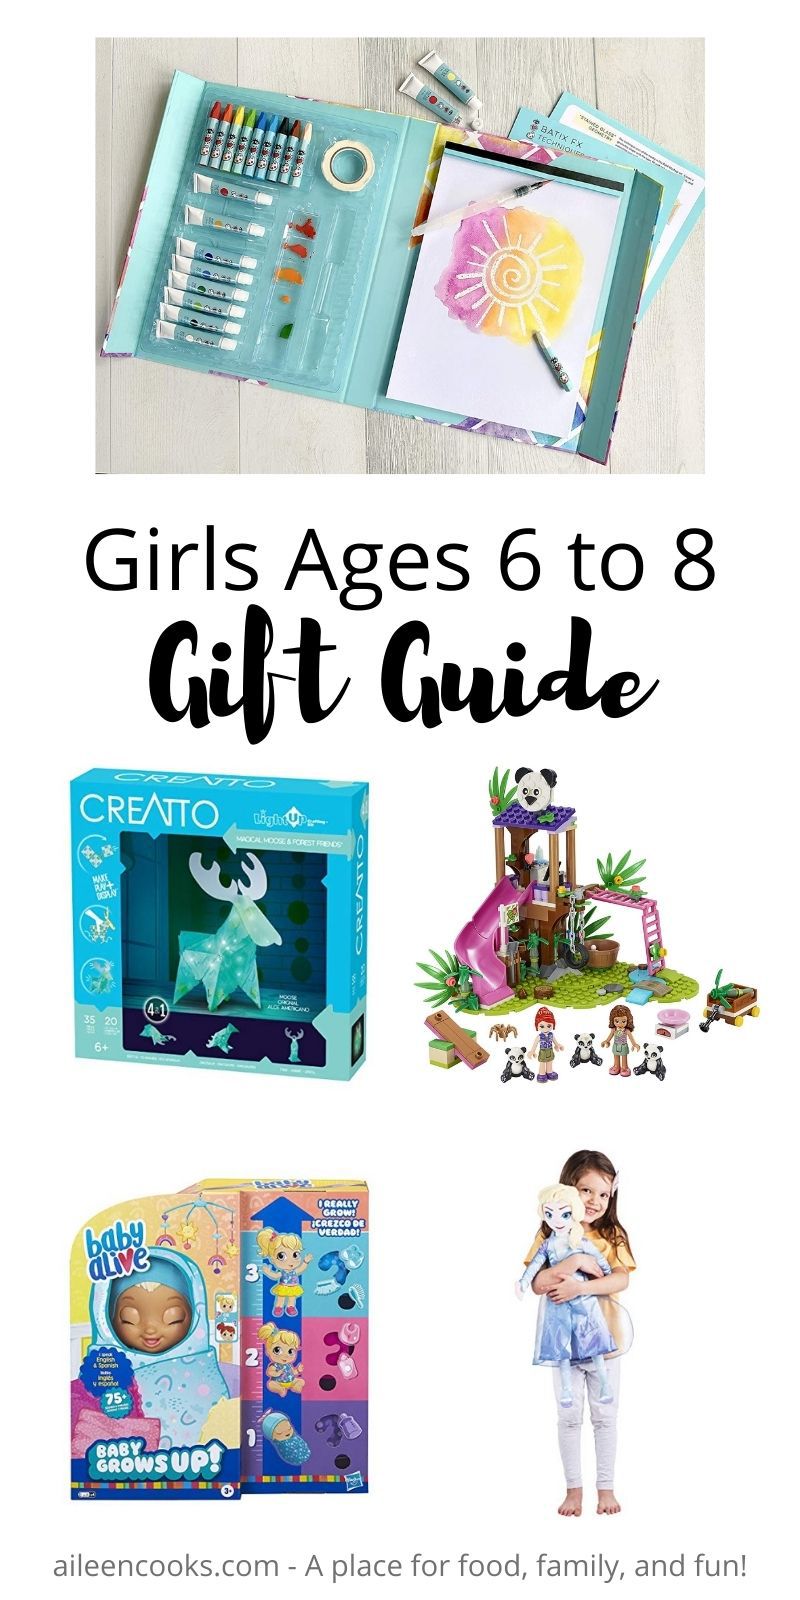 Collage photo of gift ideas for girls with words "girls ages 6 to 8 gift guide" in black lettering.